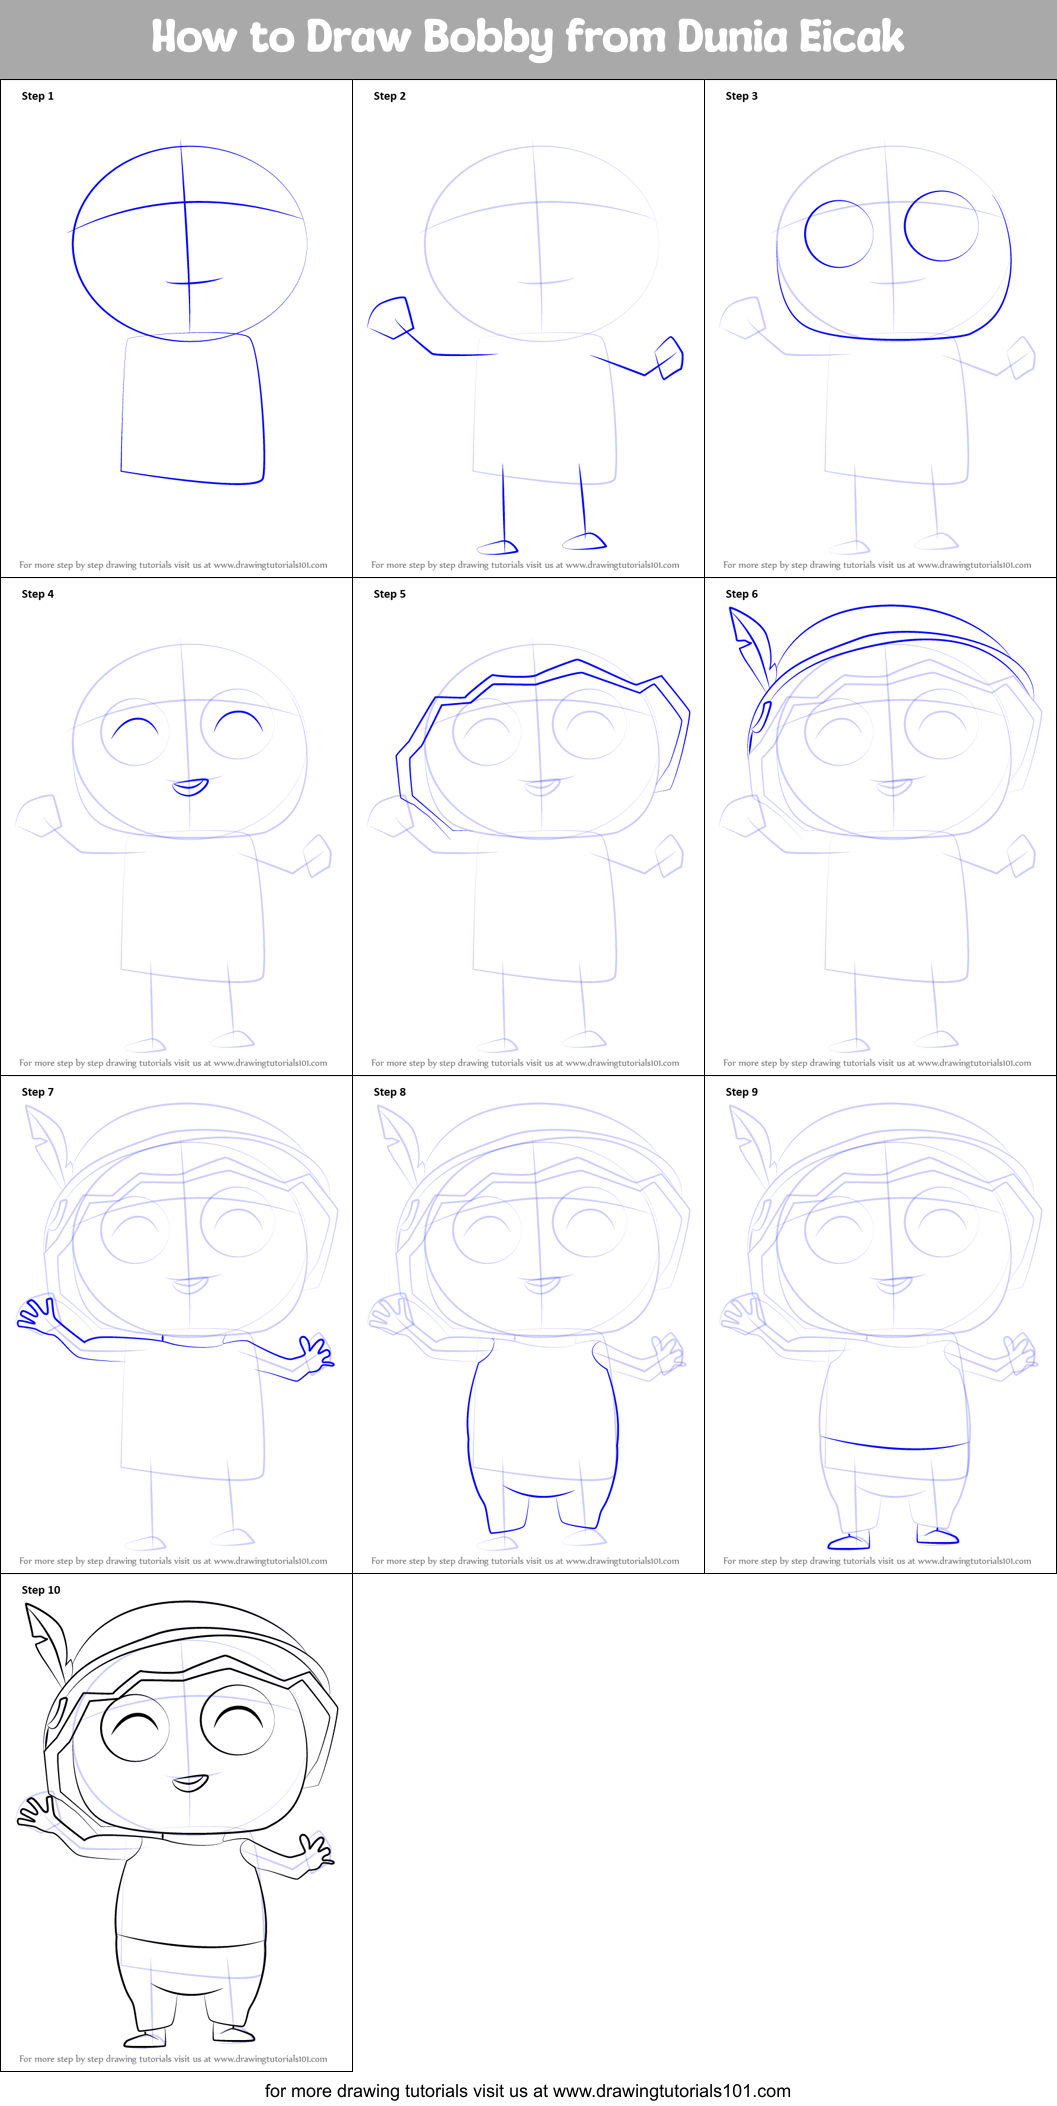 How To Draw Little Bobby: Step by Step and Simple Drawing Guide